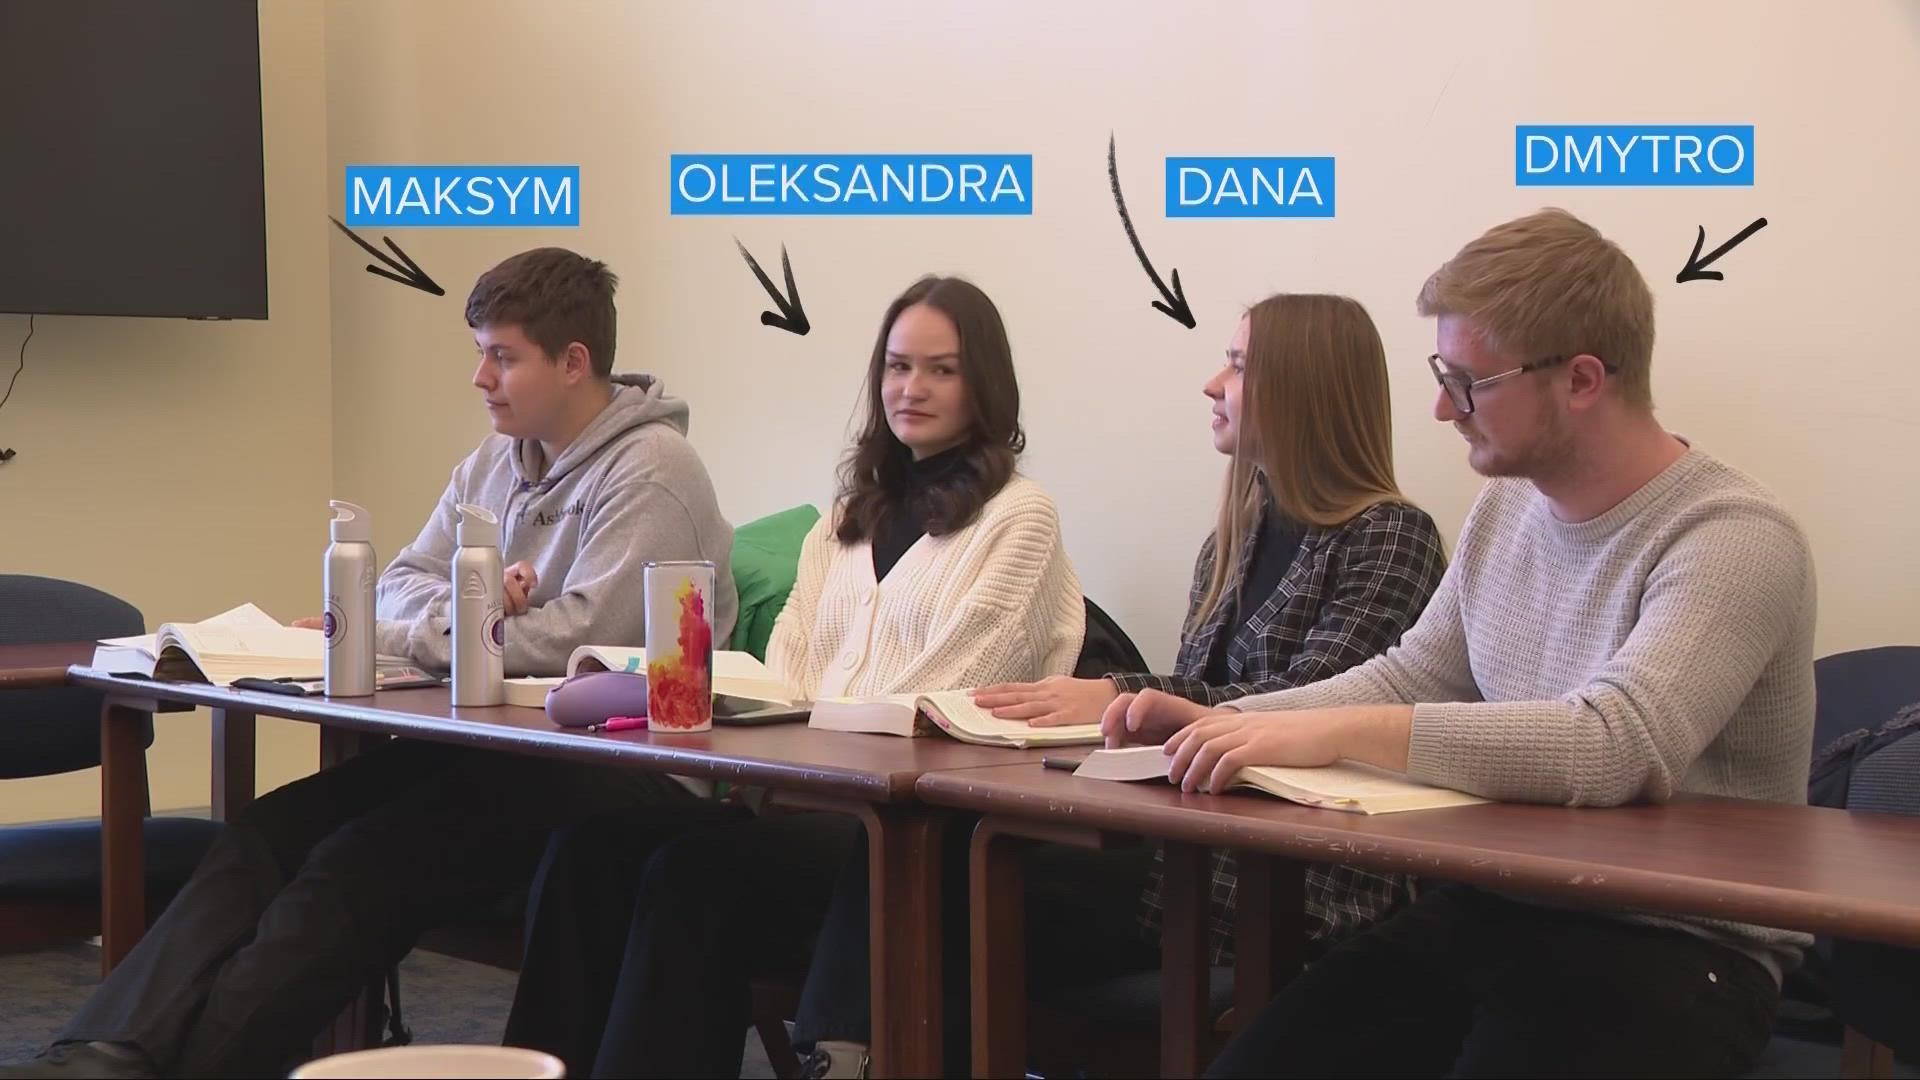 The four students are all participating in the Ukrainian Freedom Scholar program at the university.